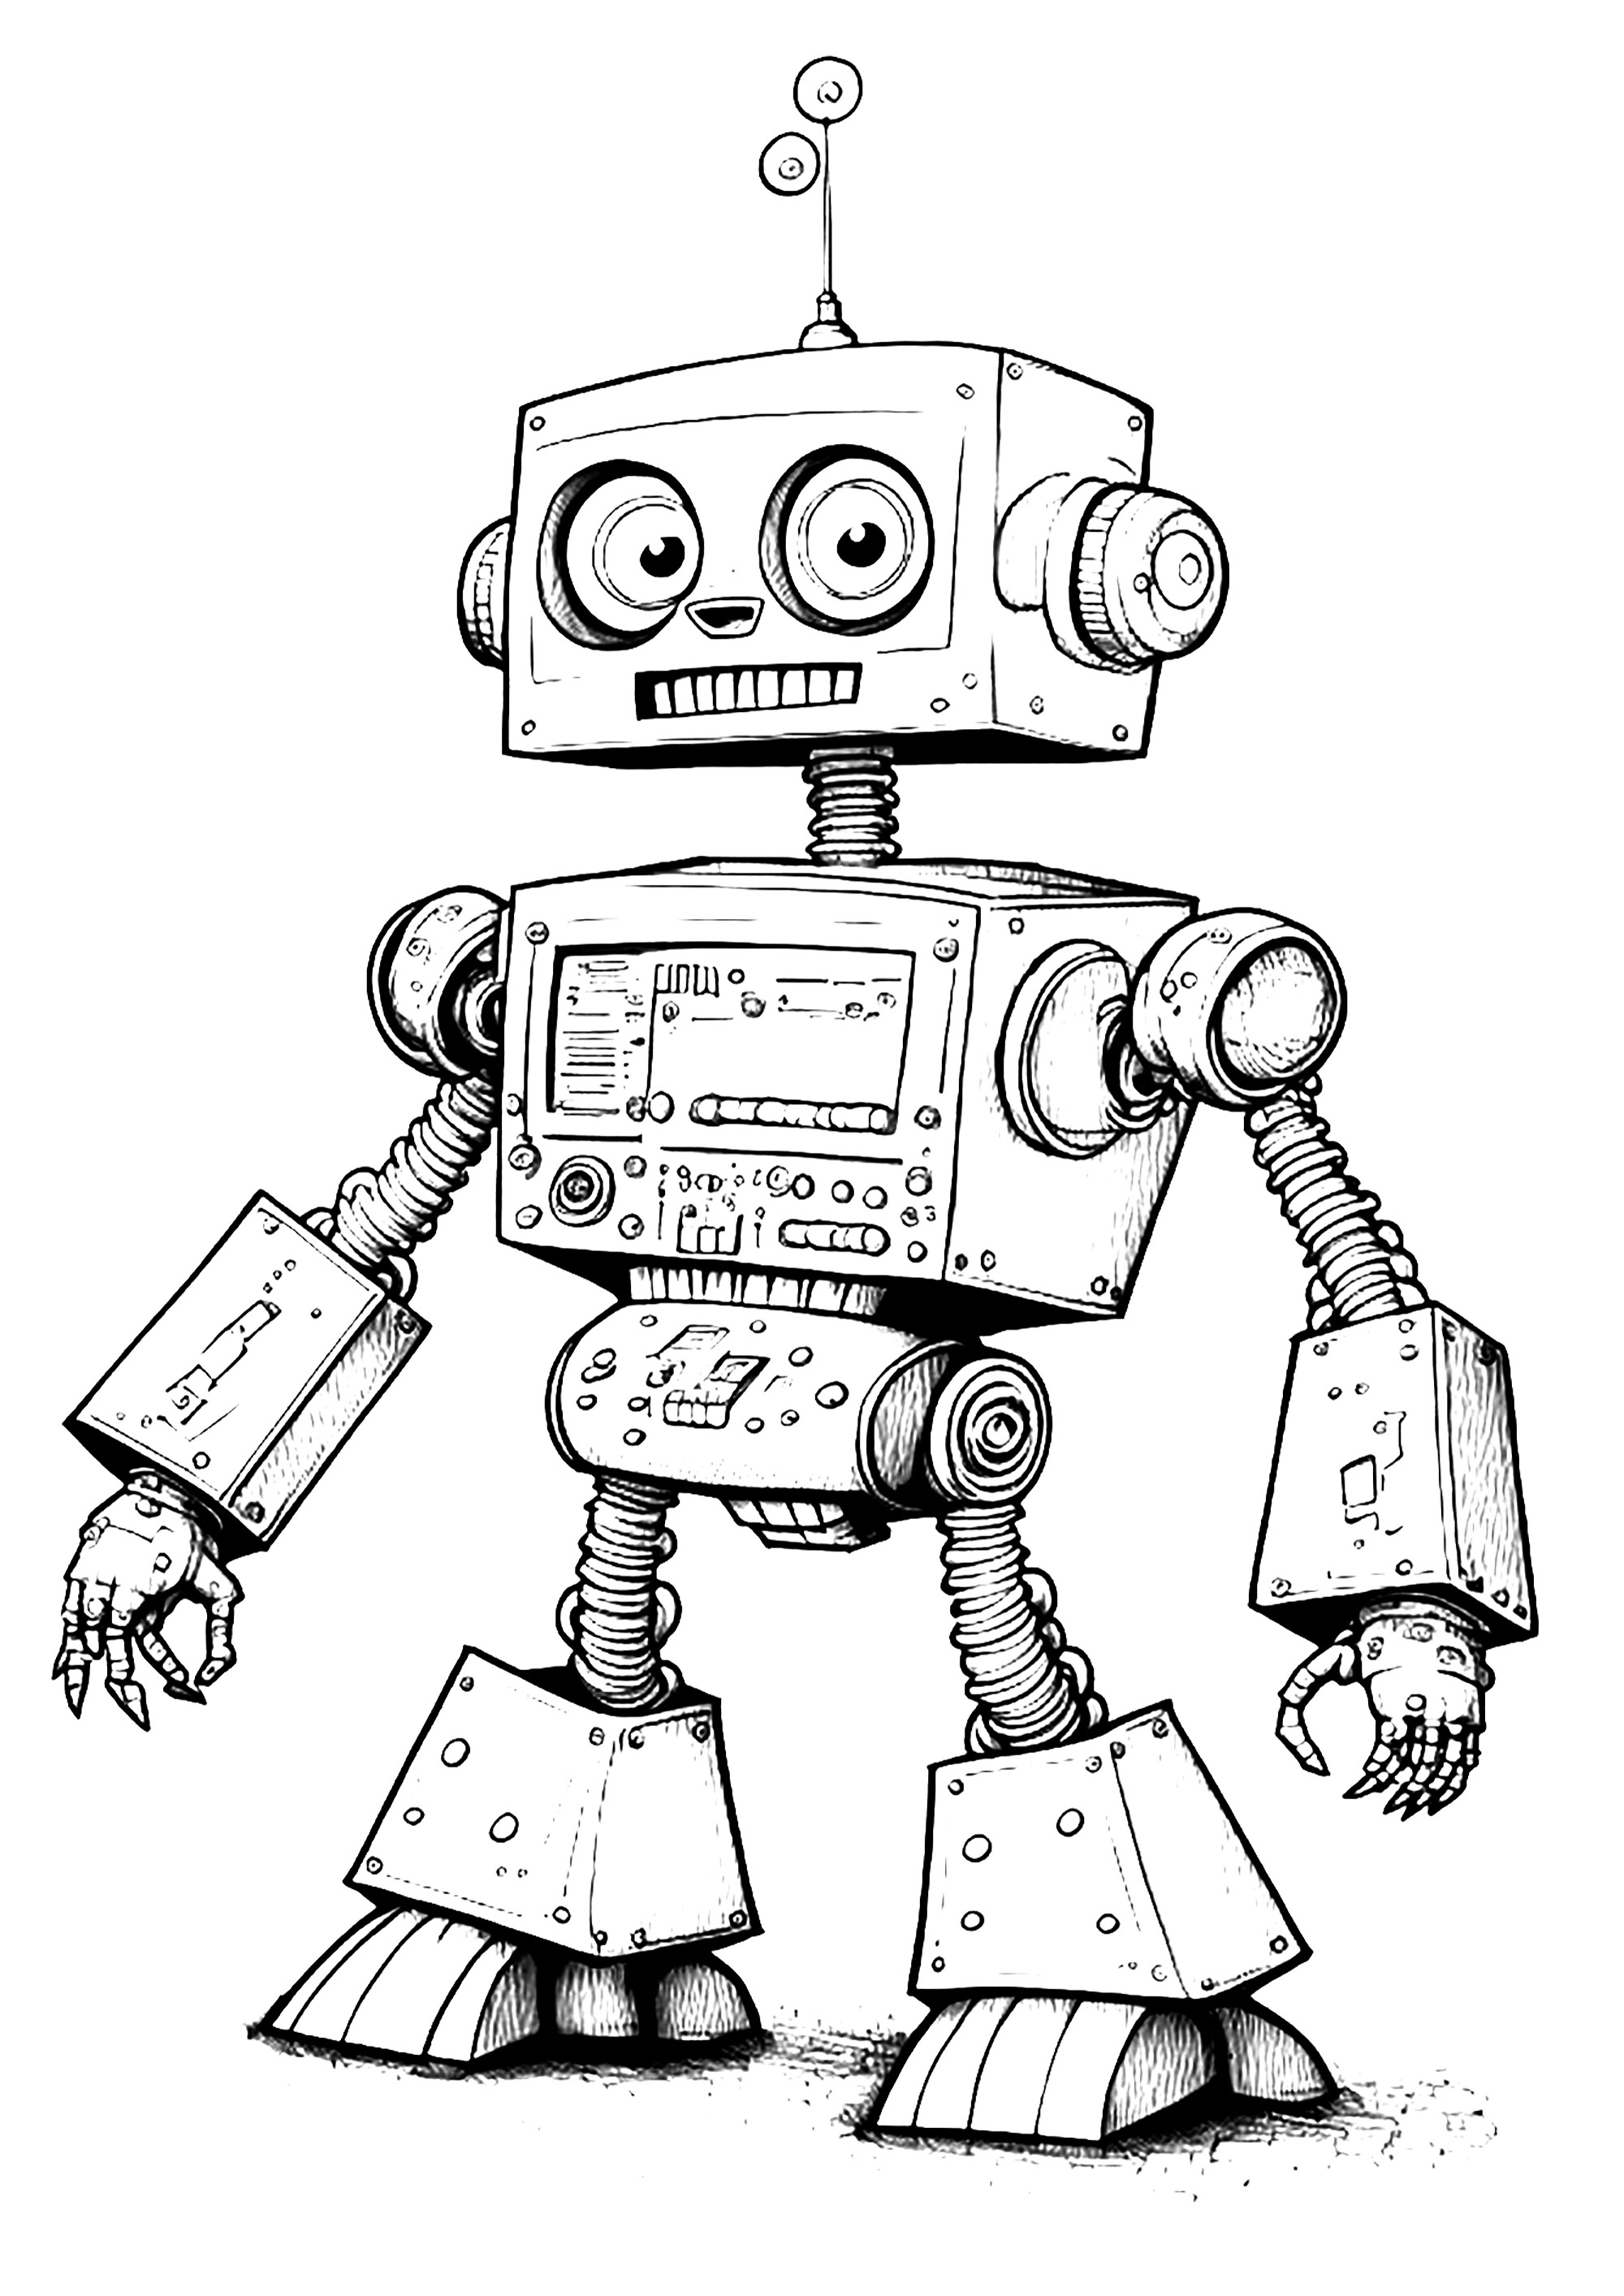 Metal robot from the 80's